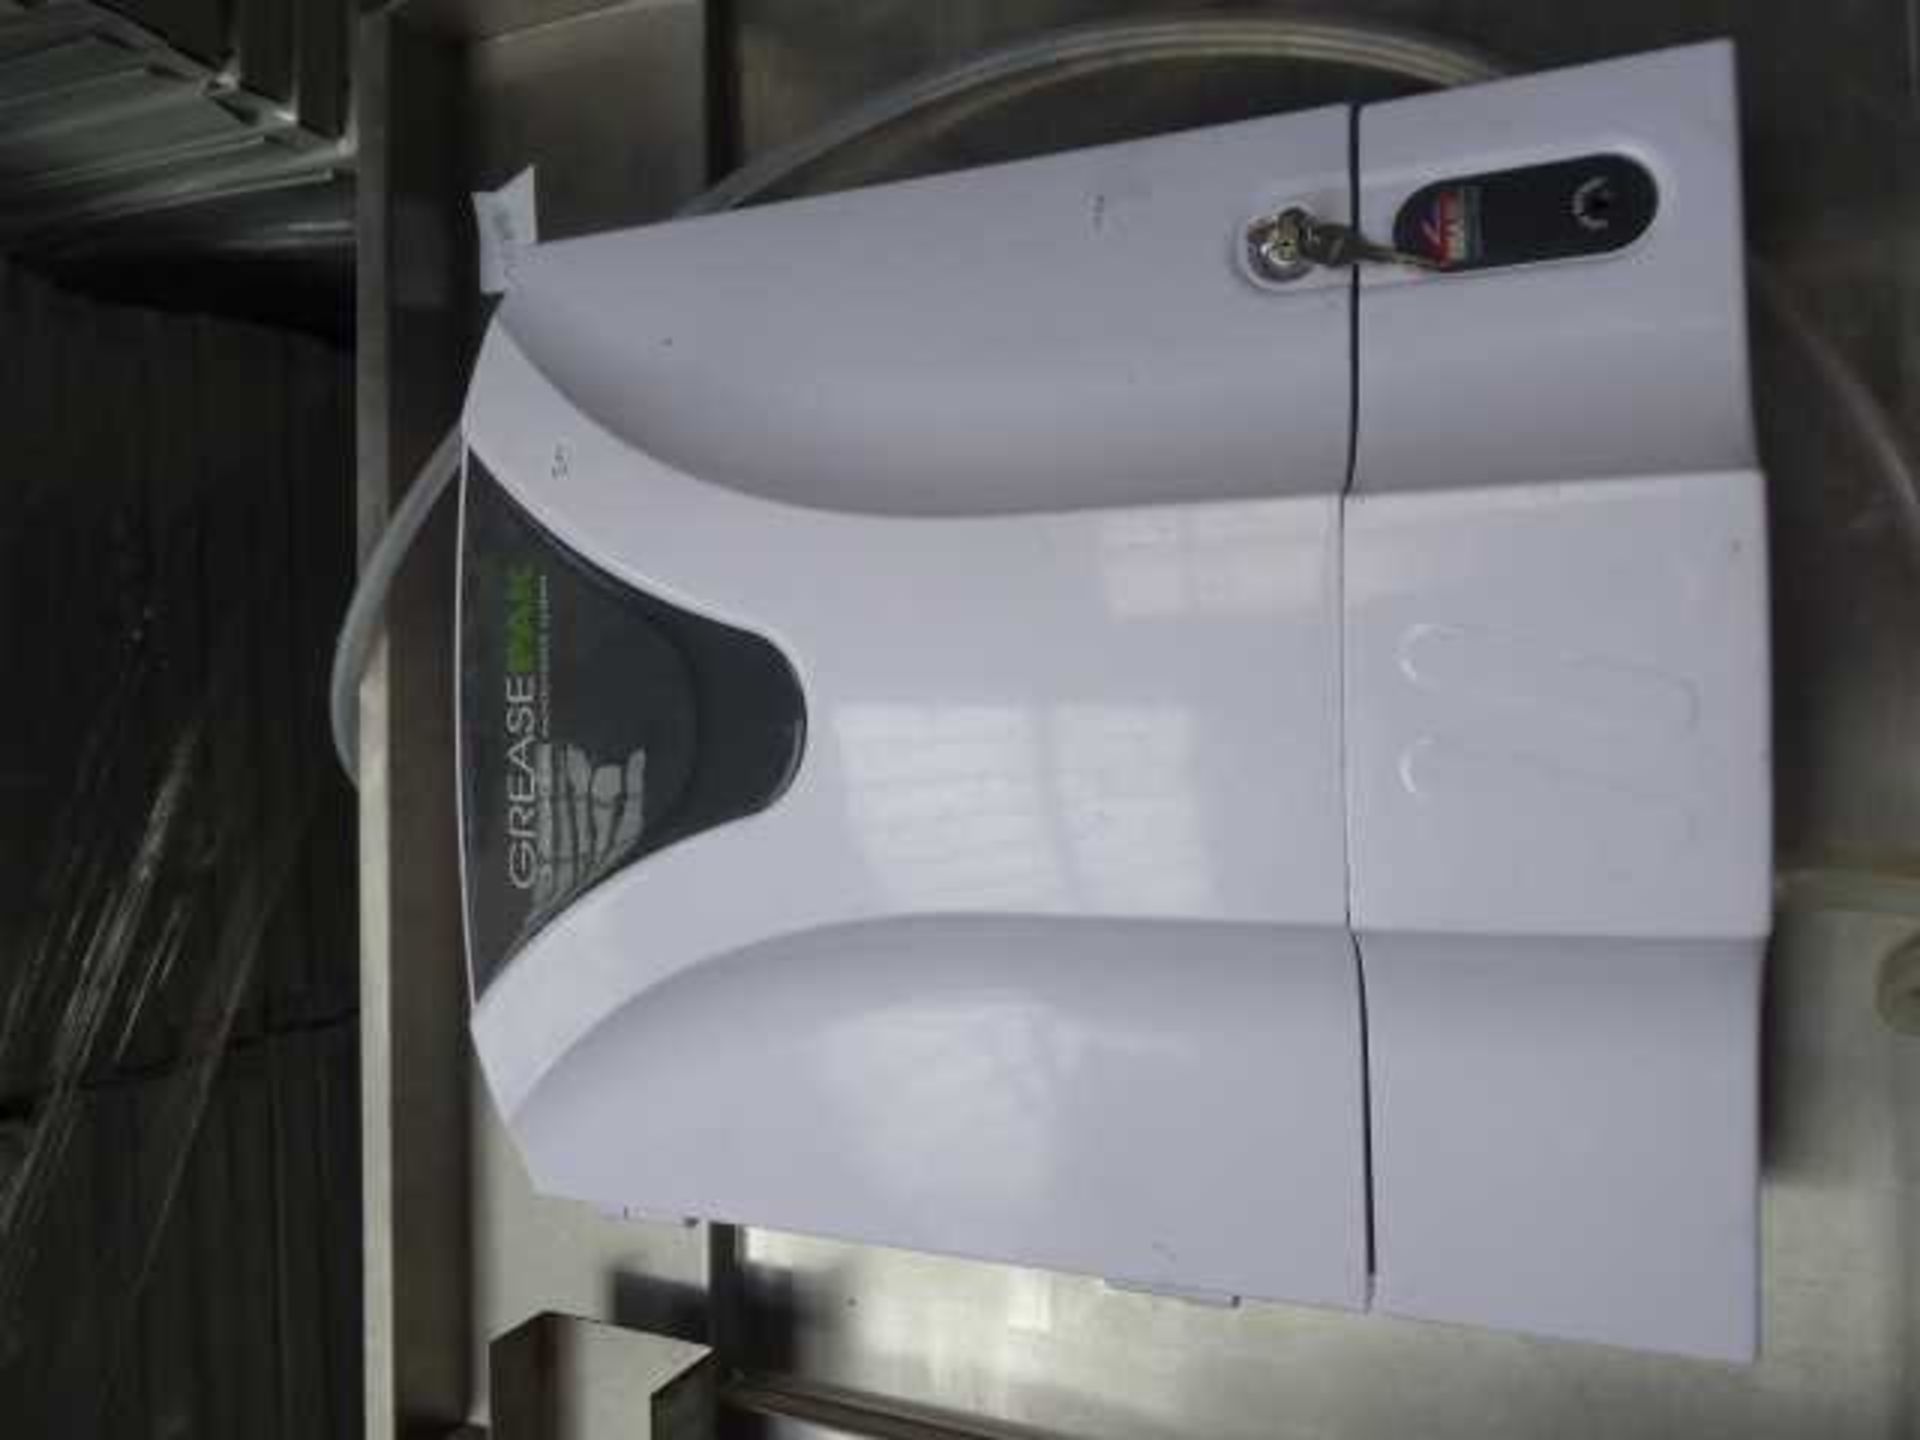 62cm Maidaid C1035WS lift top pass through dish washer with associated draining board and sink - Image 3 of 5